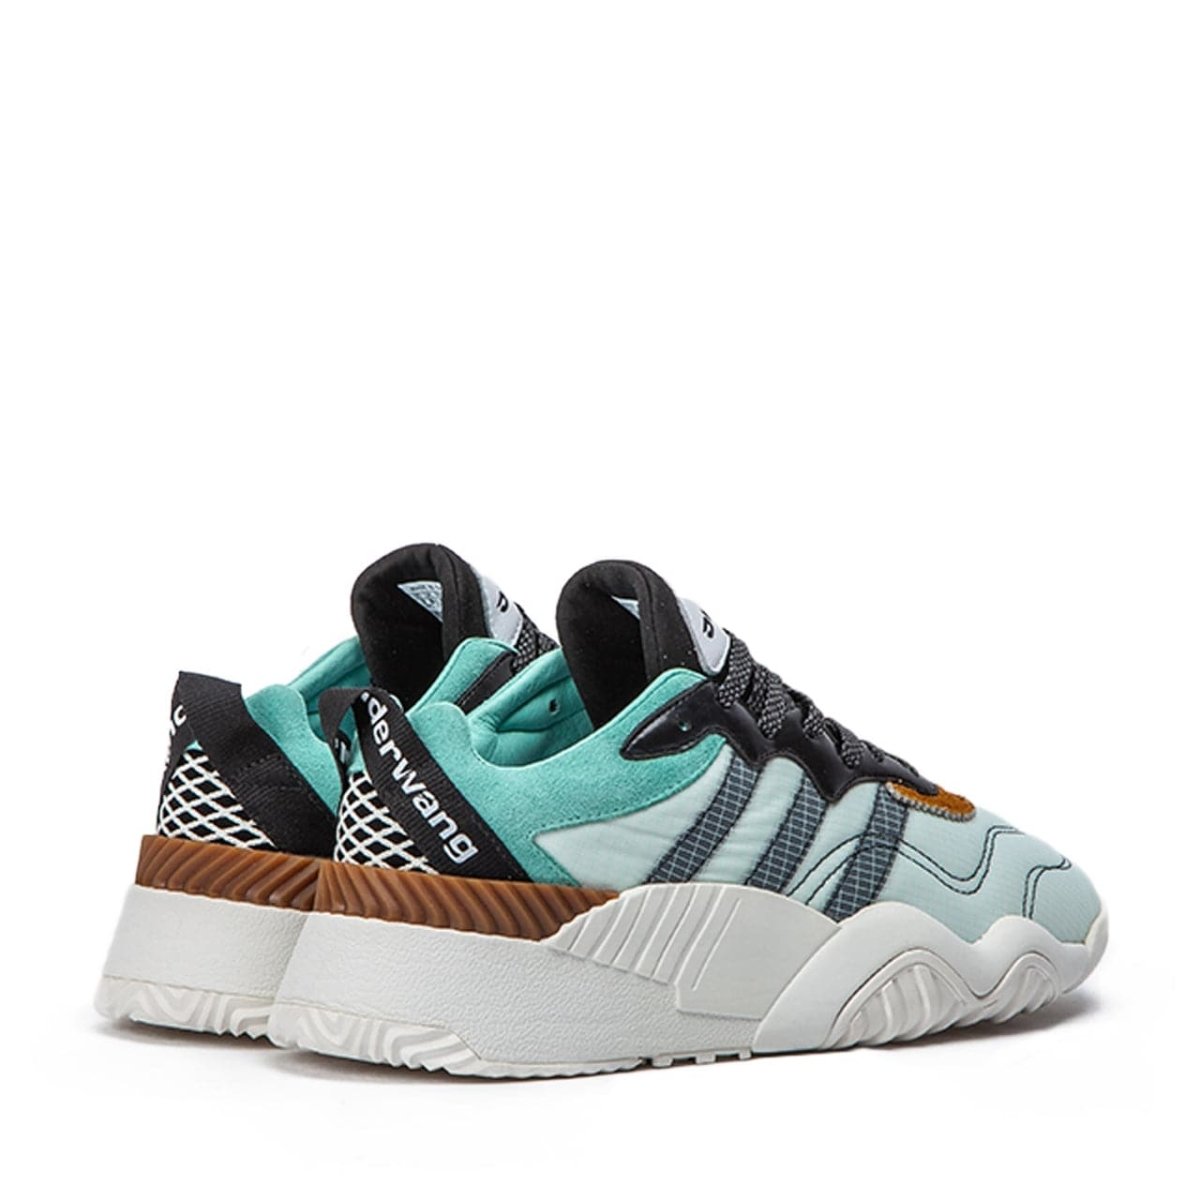 adidas by Alexander Wang AW Turnout Trainer (Mint / Black) DB2613